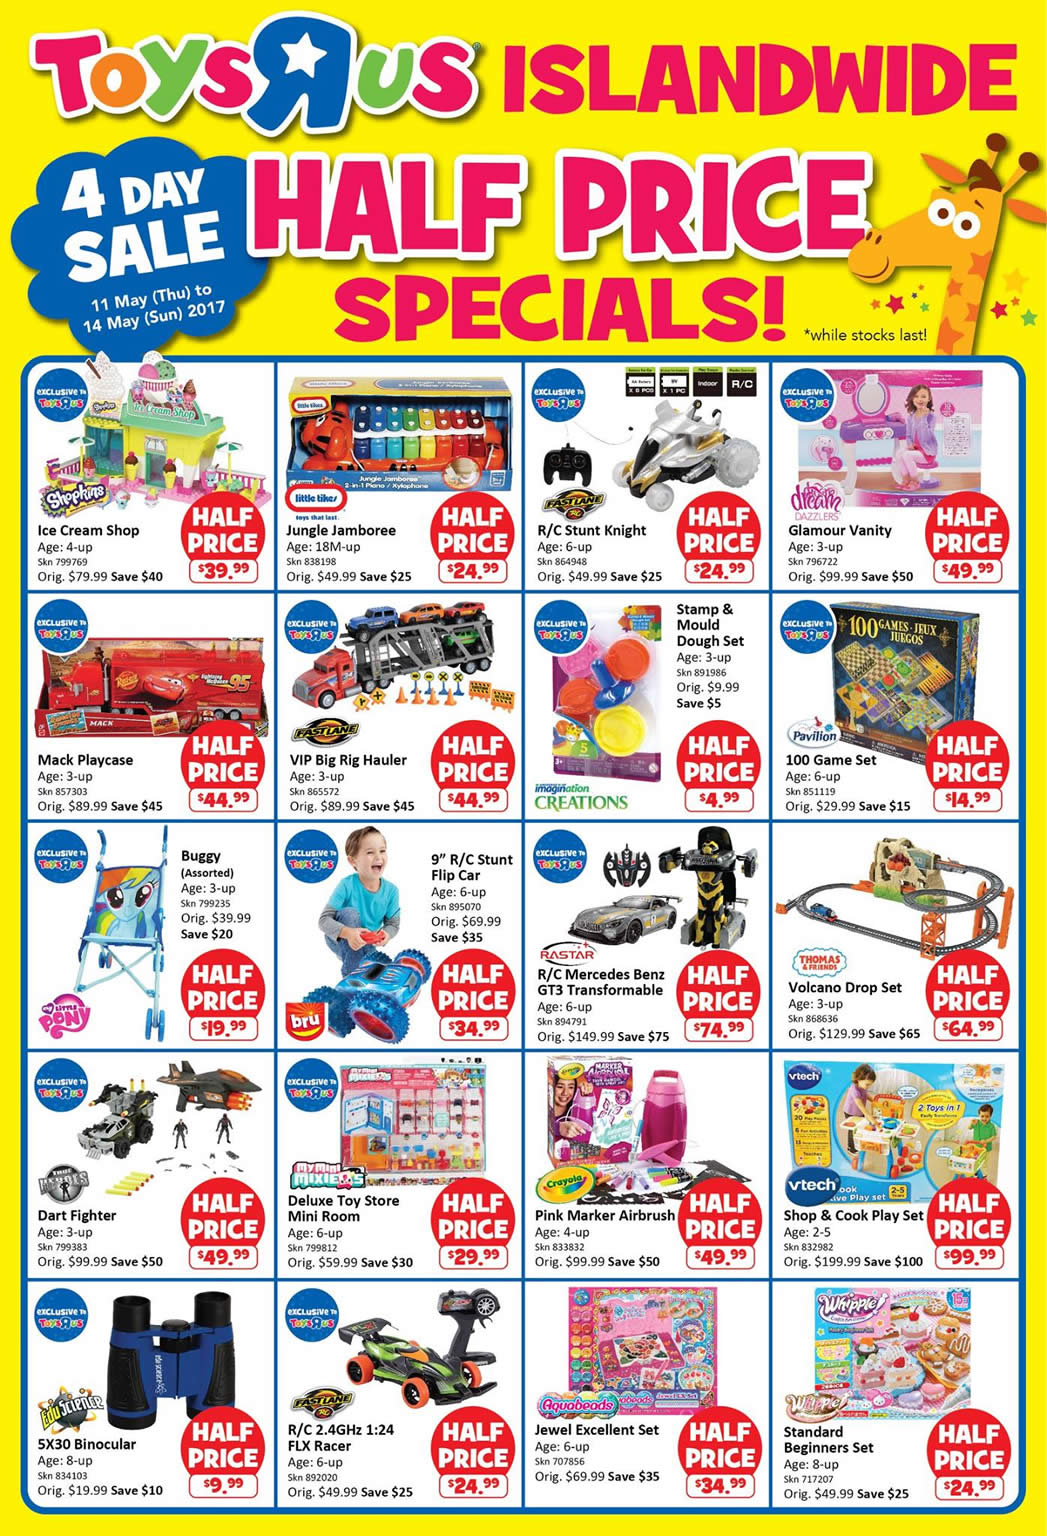 Toys “R” Us Half-Priced specials at ALL stores from 11 – 14 May 2017